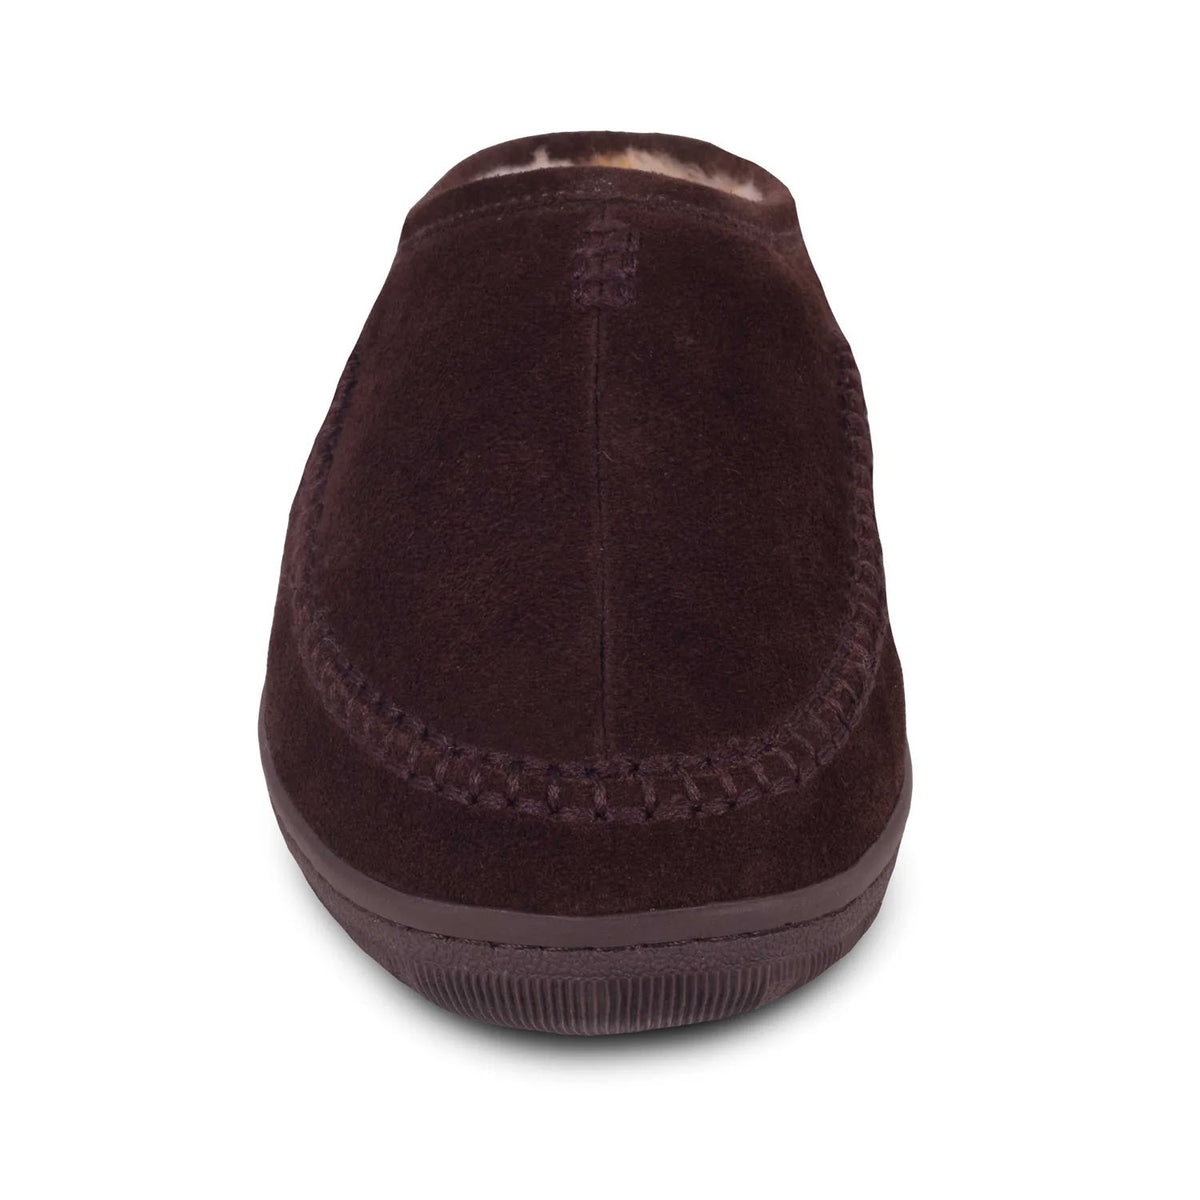 Rear view of a Deer Stags CLOUD NINE PACIFIC SLIDE CHOCOLATE SUEDE - MENS shoe with visible stitching and a dark sole on a white background, evoking foot happiness.